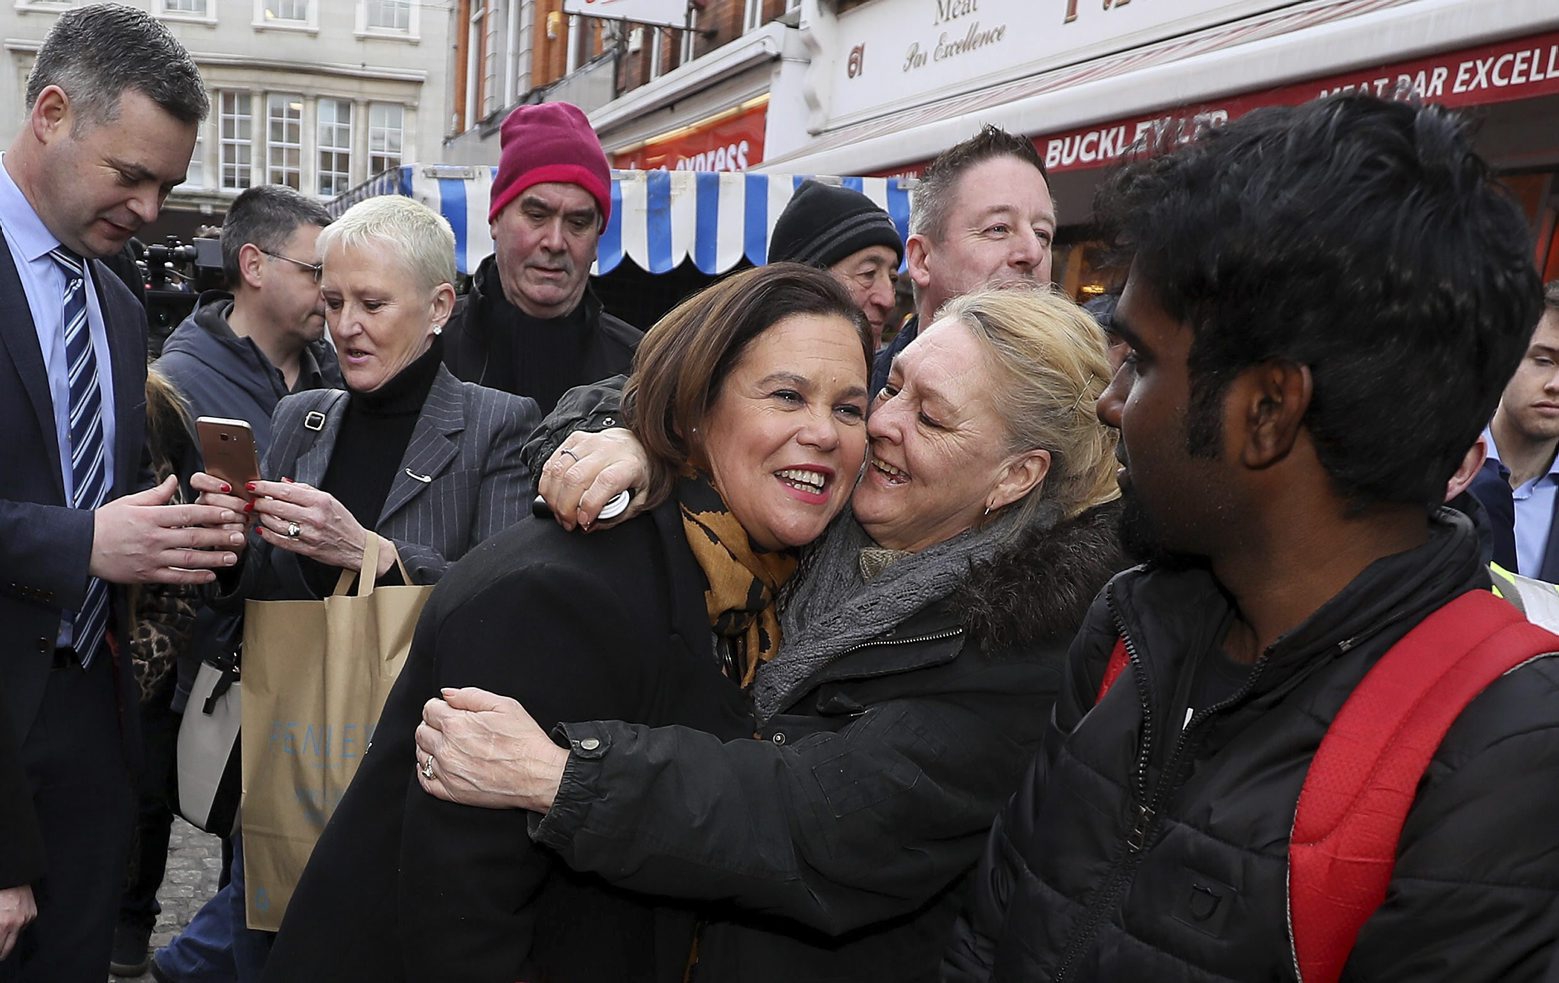 Sinn Fein leader Mary Lou McDonald, center, is greeted by well wishers during a walkabout in central Dublin during a walkabout in central Dublin, whilst on the General Election campaign trail on Thursday, Feb. 6, 2020. Ireland goes to the polls for a general election on Feb. 8. (Brian Lawless/PA via AP) Ireland Elections